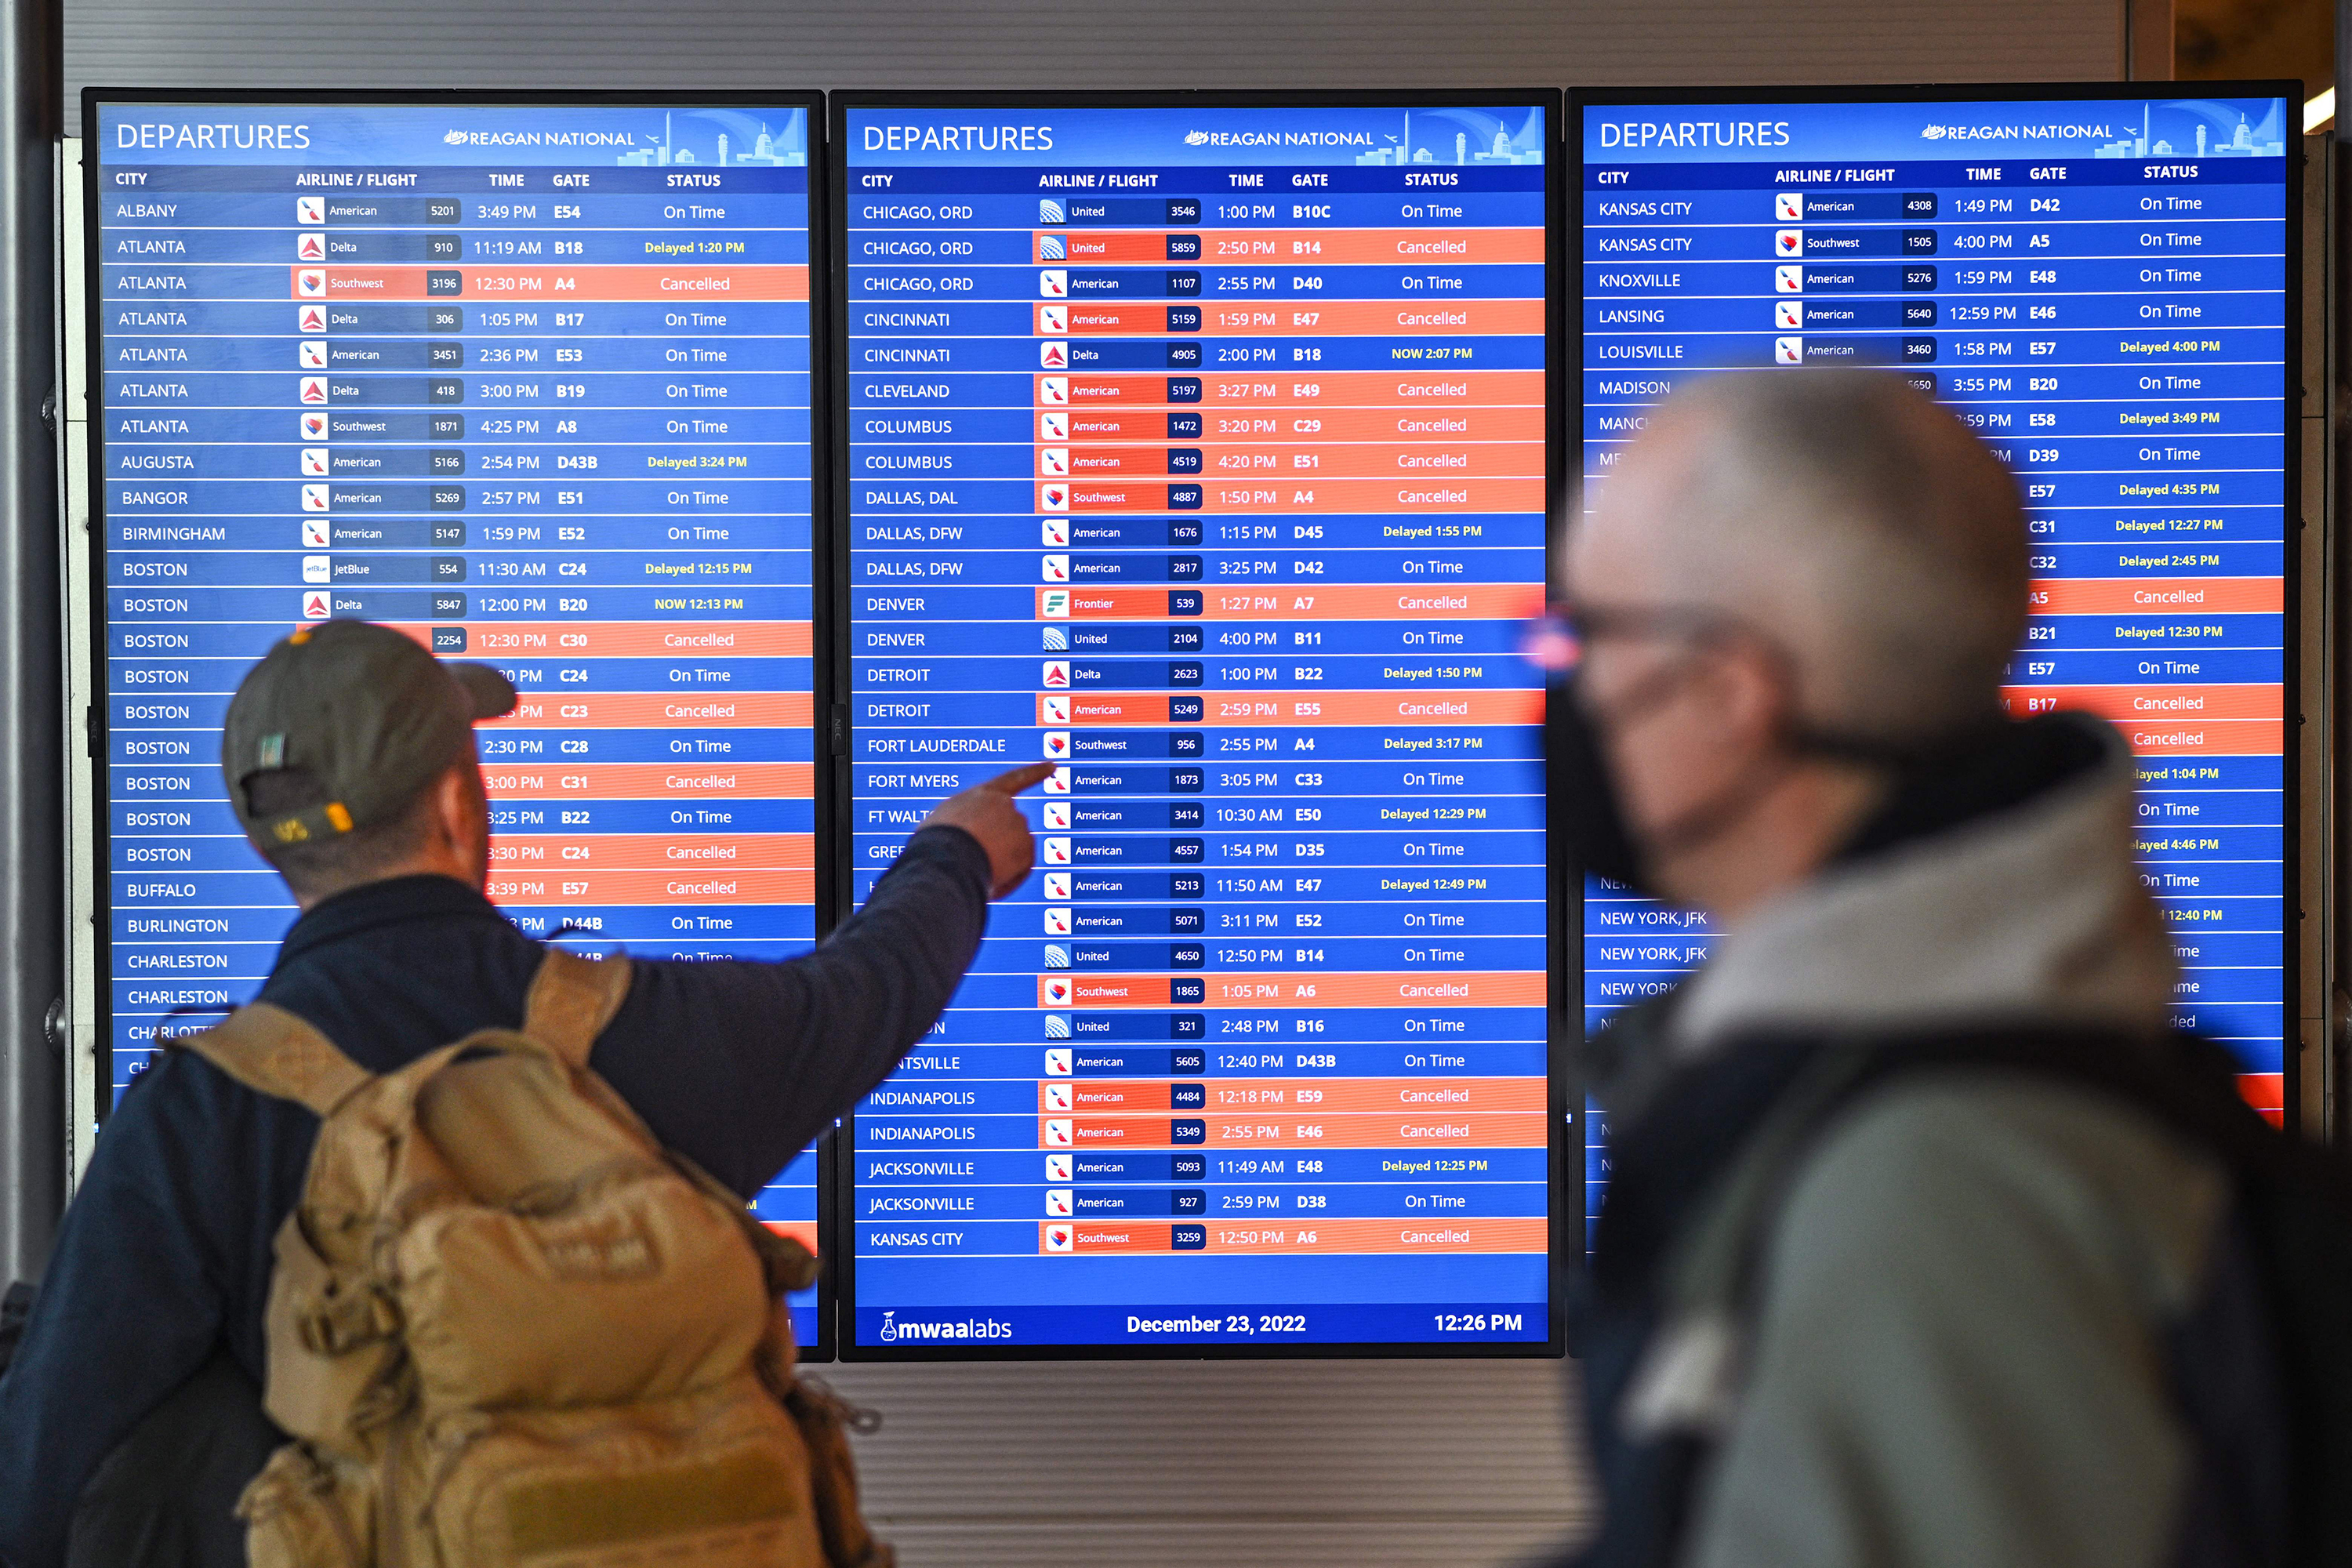 Travelers look at an information board showing flight cancellations and delays at Reagan National airport in Arlington, Virginia, on December 23.